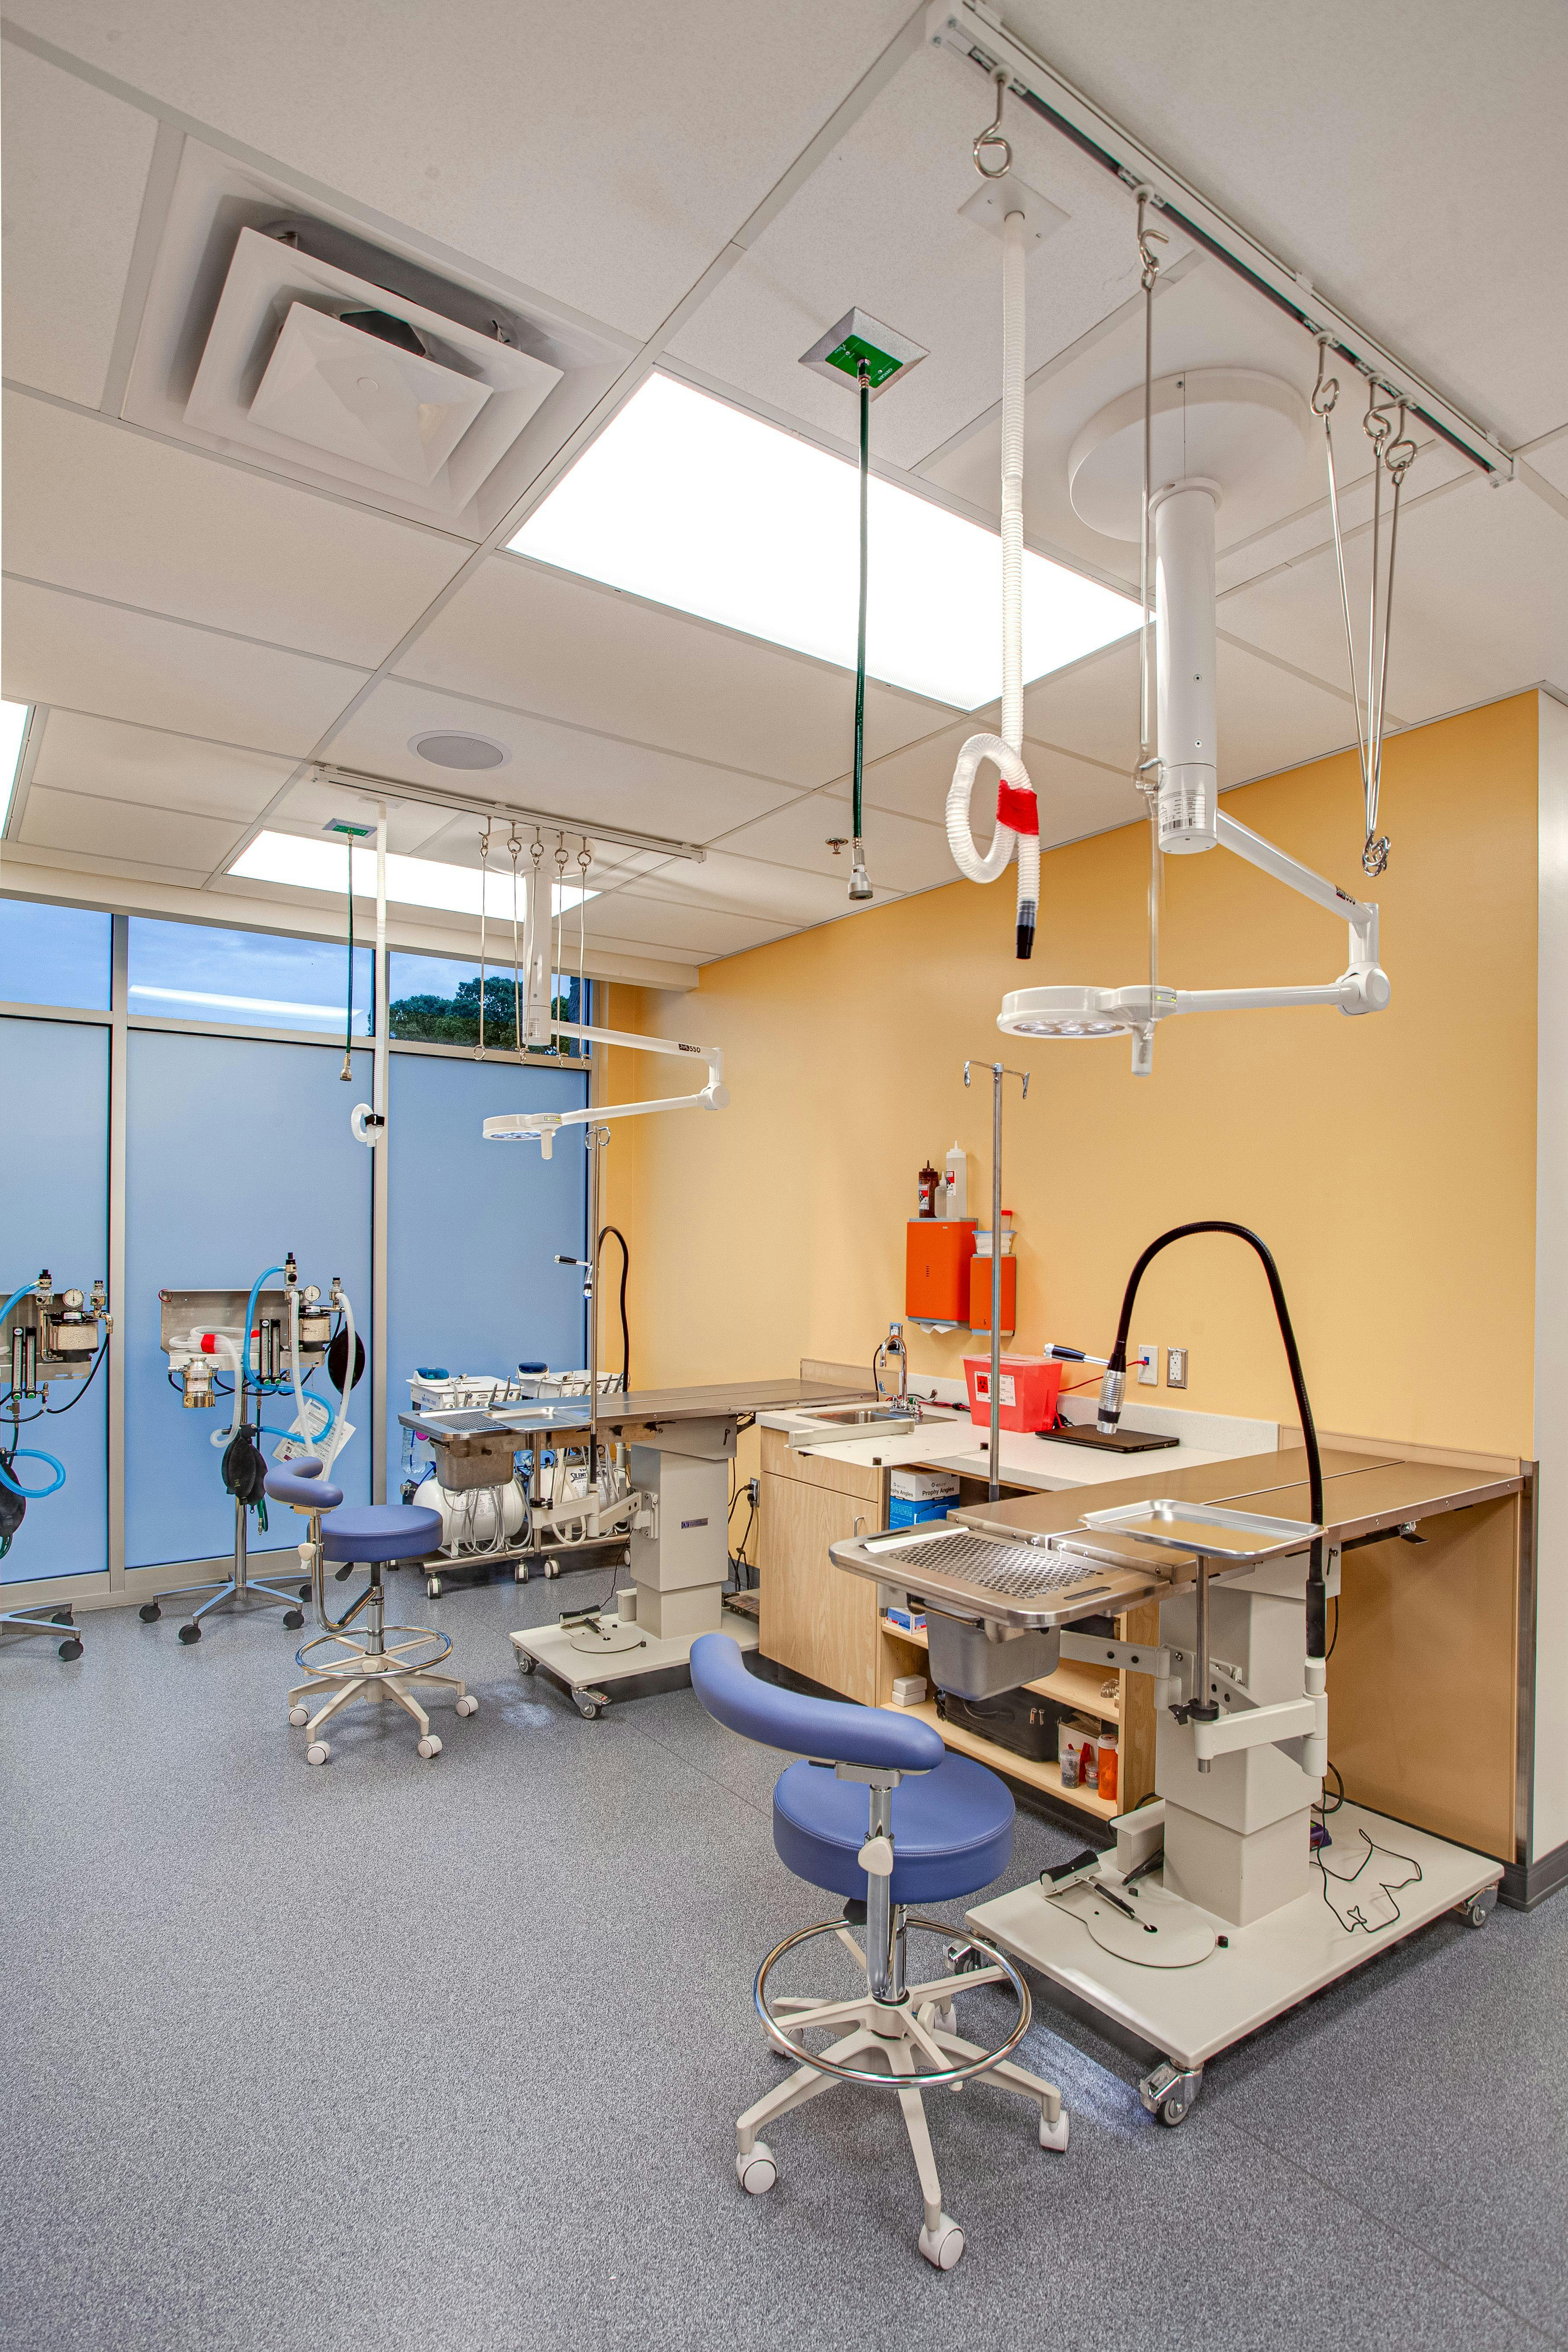 Dental suite with two stations.